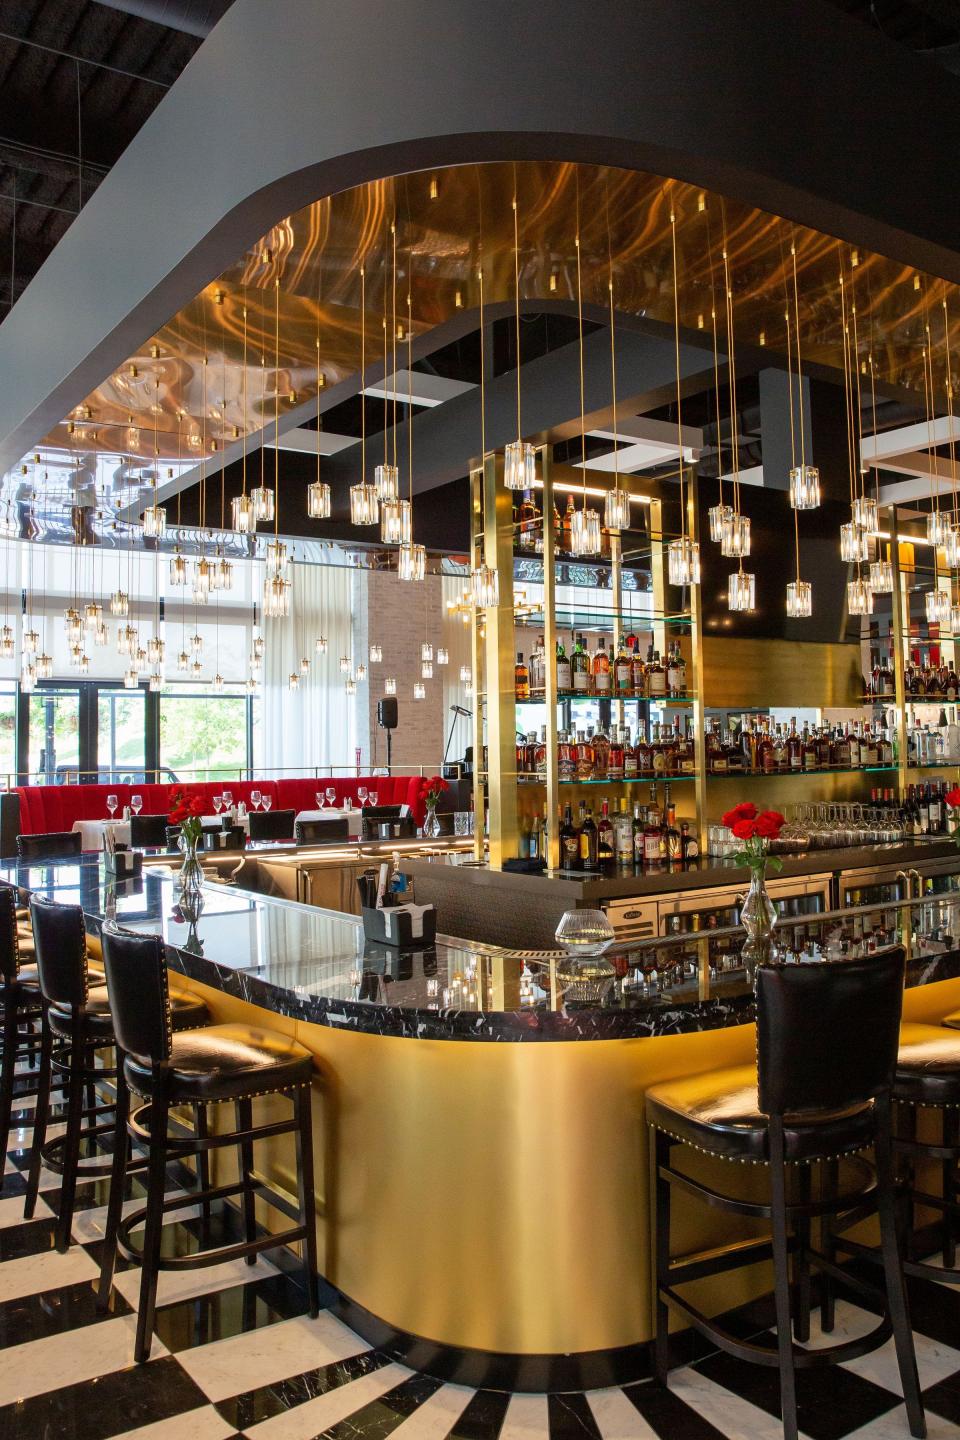 Joe Muer Seafood is open in Nashville's Capitol View neighborhood. The Detroit-based seafood restaurant has a large central bar, 200-seat dining room and outdoor patio seating.